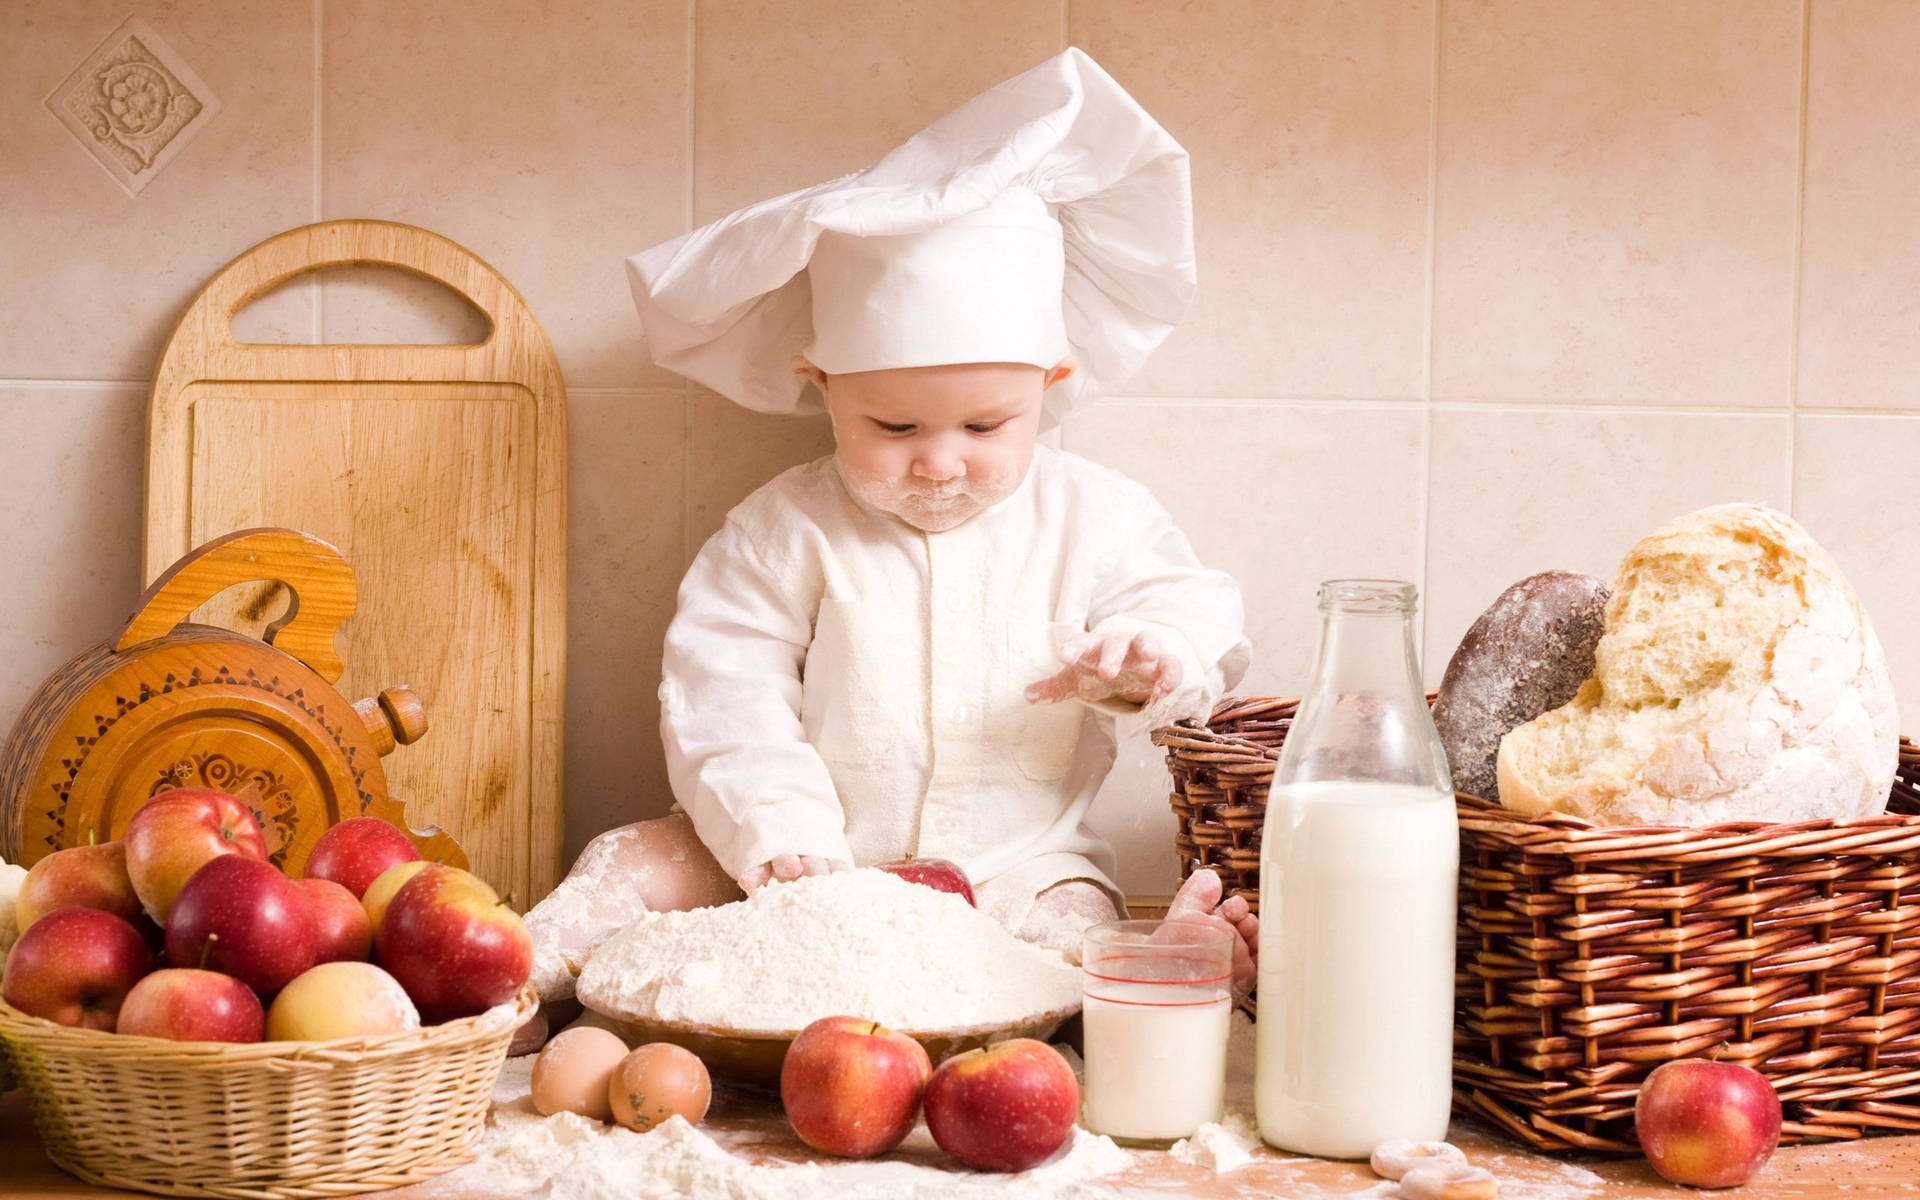 Adorable Cooking Baby